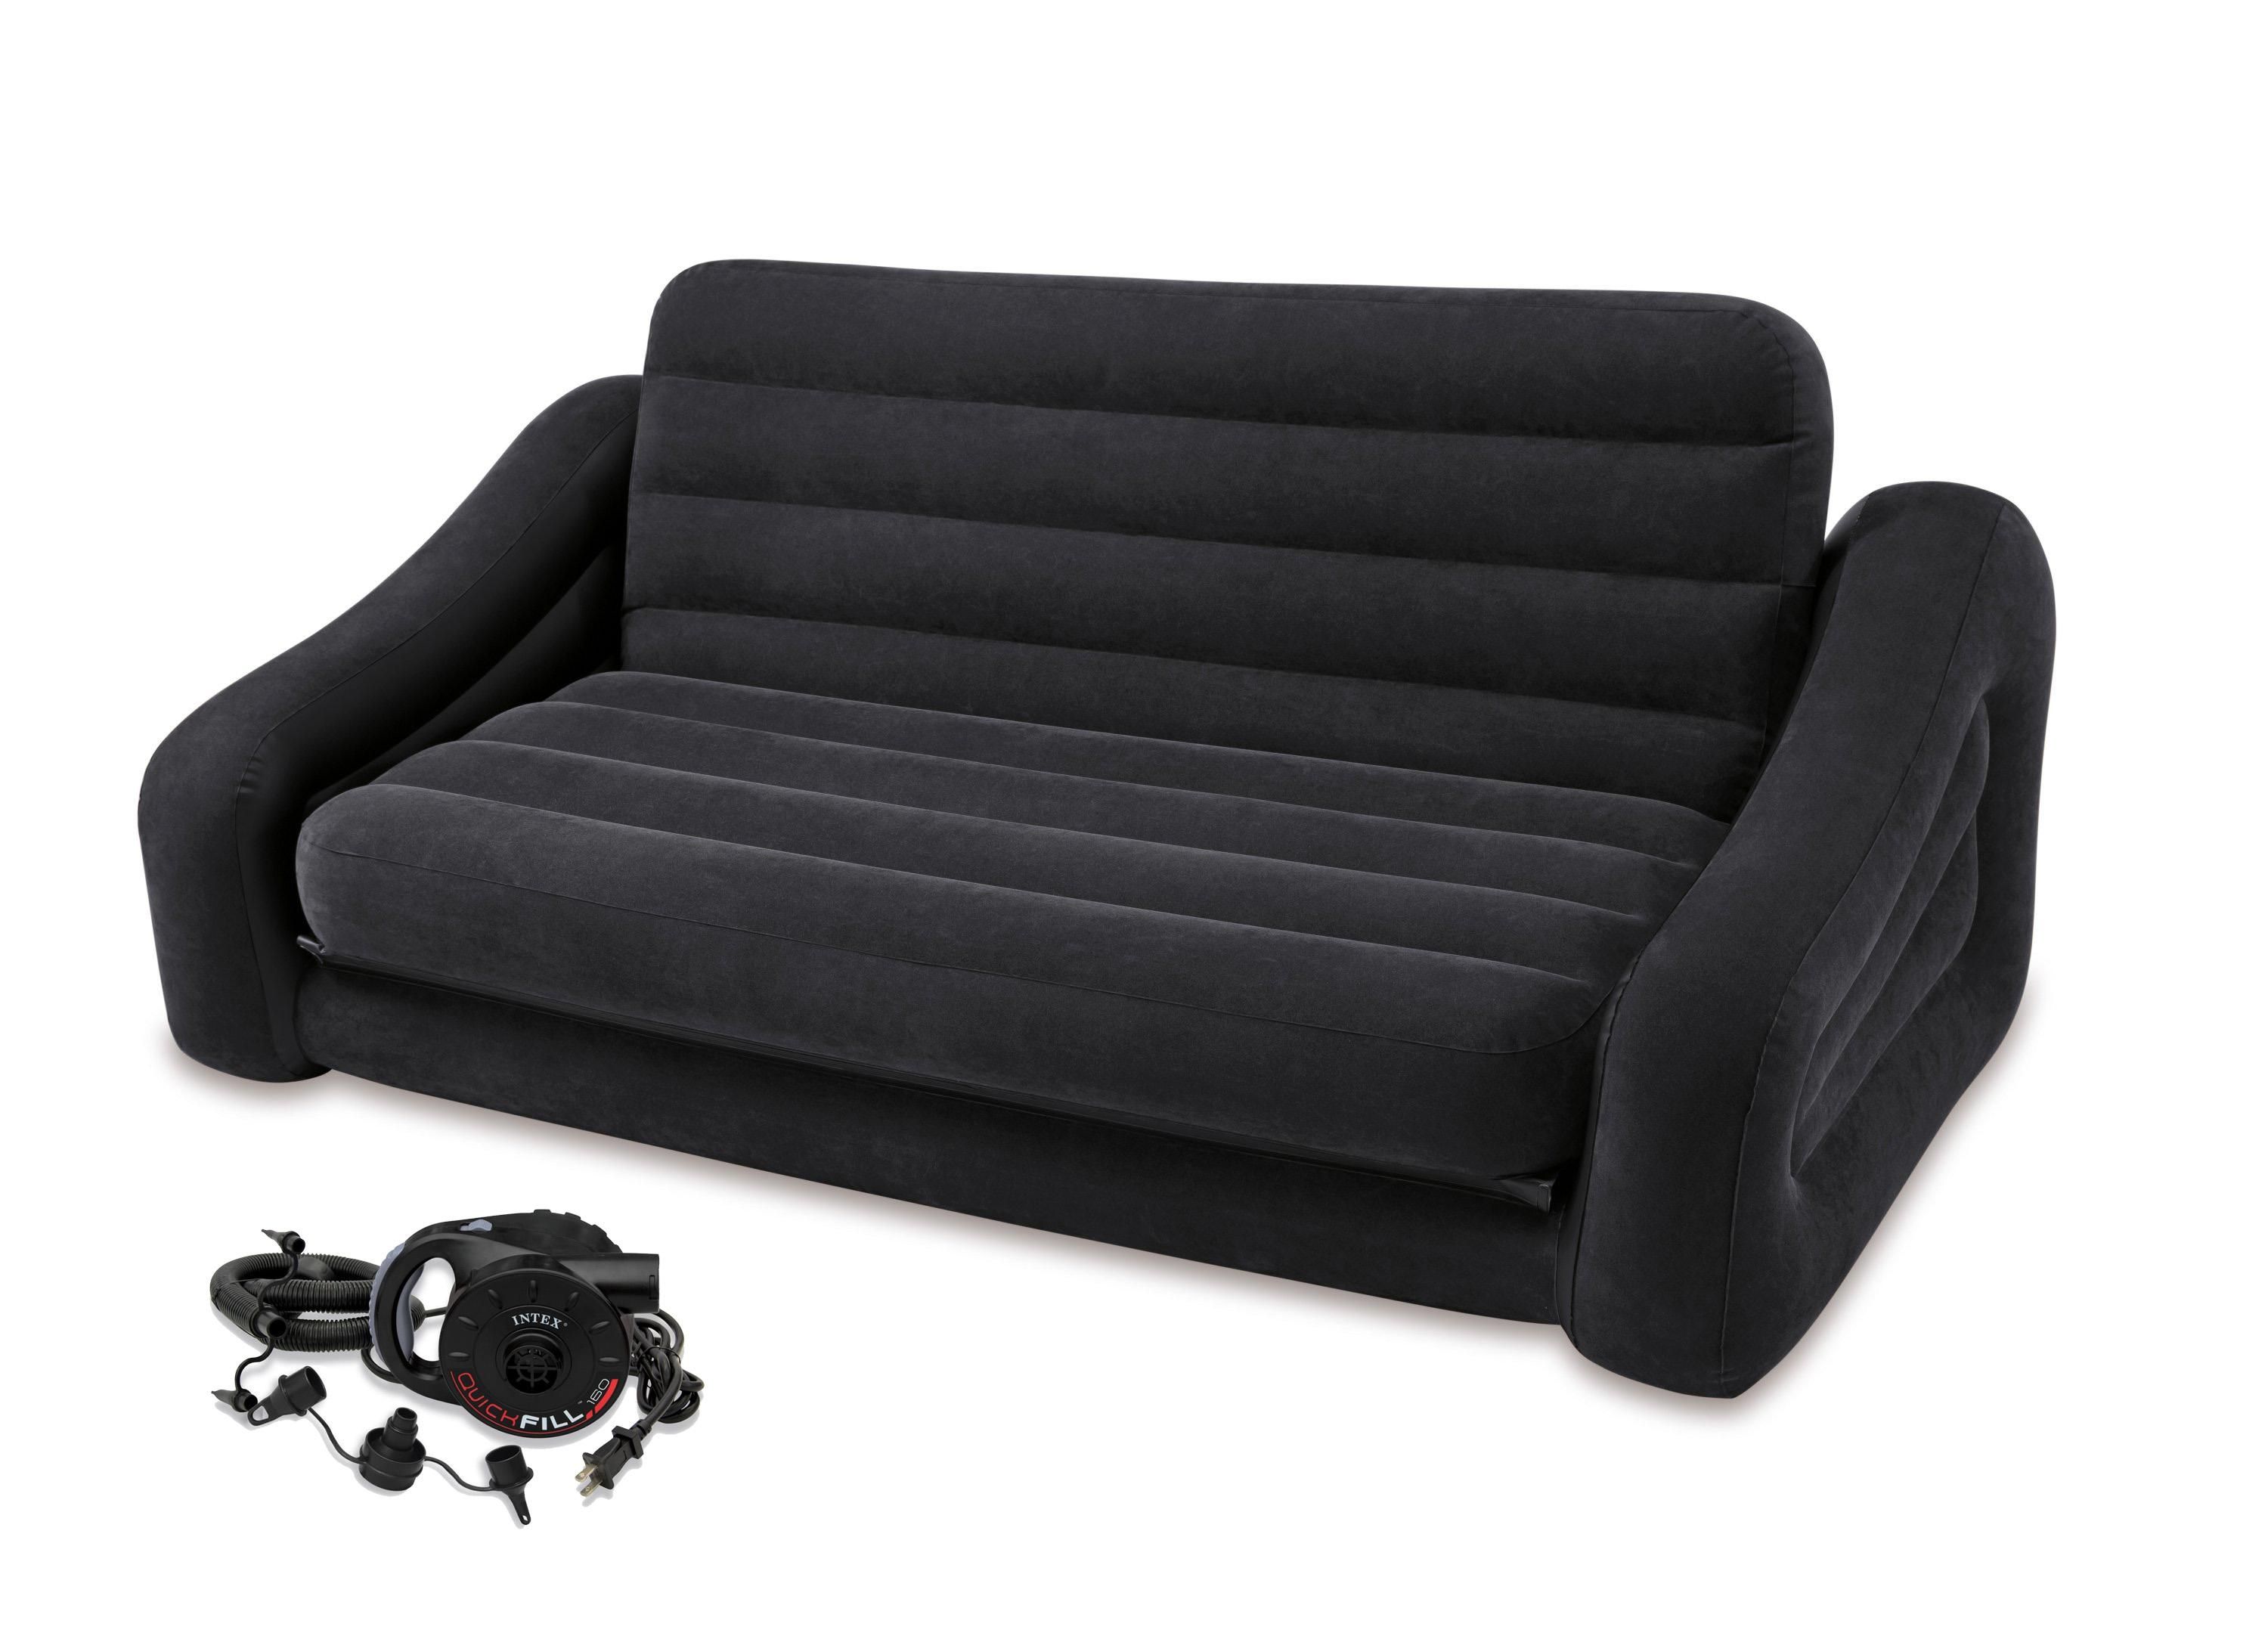 Intex Inflatable Pull Out Sofa & Queen Bed Mattress Sleeper W/ Ac Intended For Inflatable Pull Out Sofas (View 15 of 20)